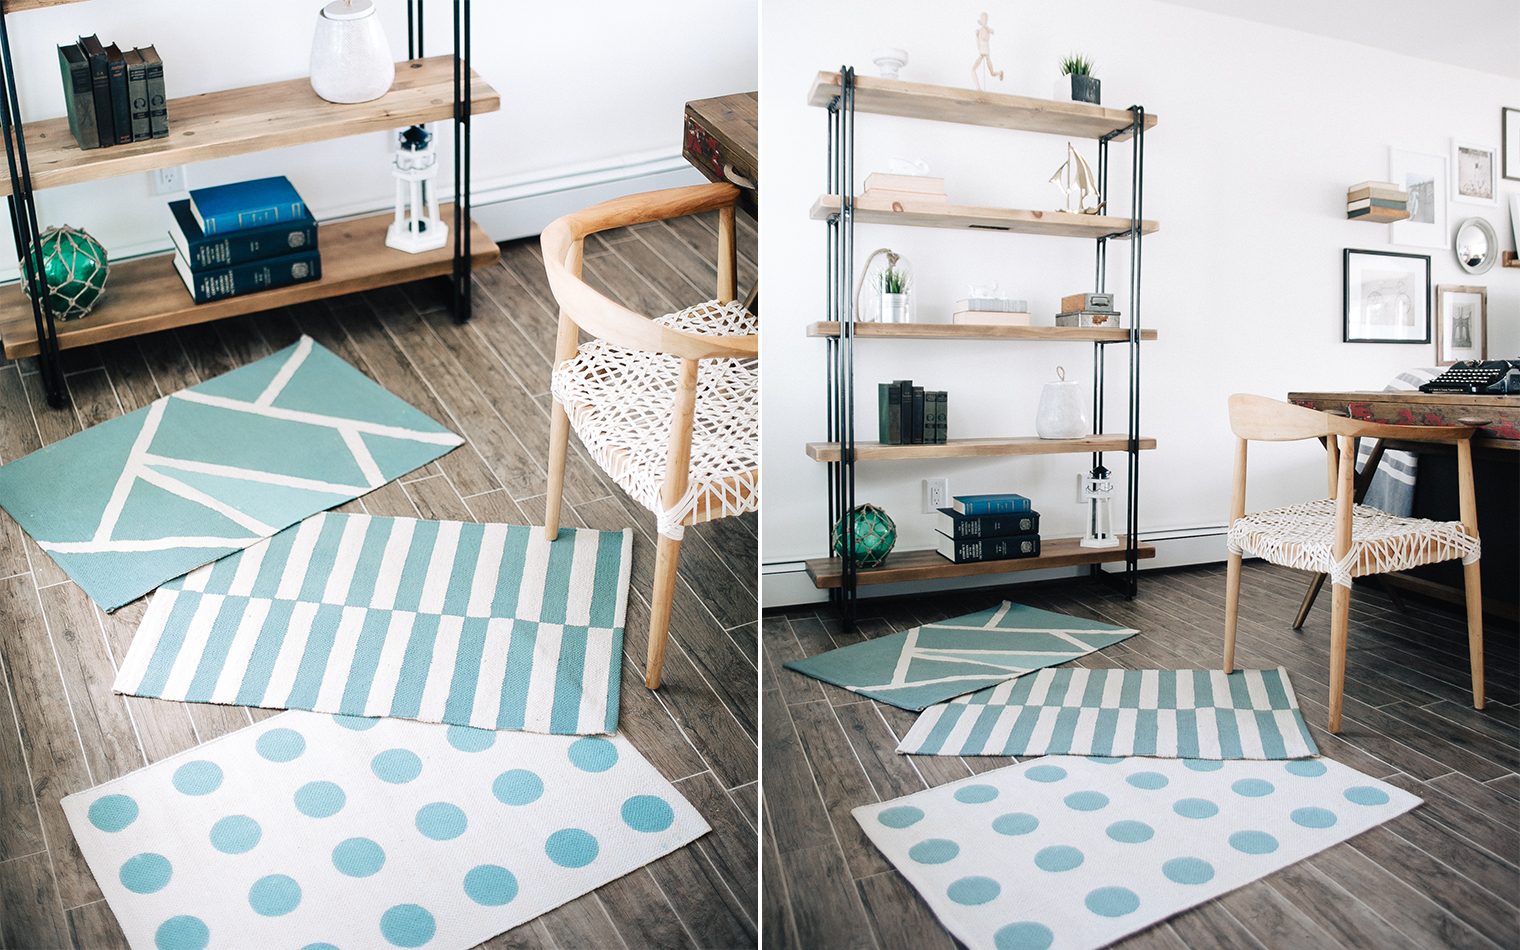 DIY-Painted-Patterned-Rugs-Project-How-To-6